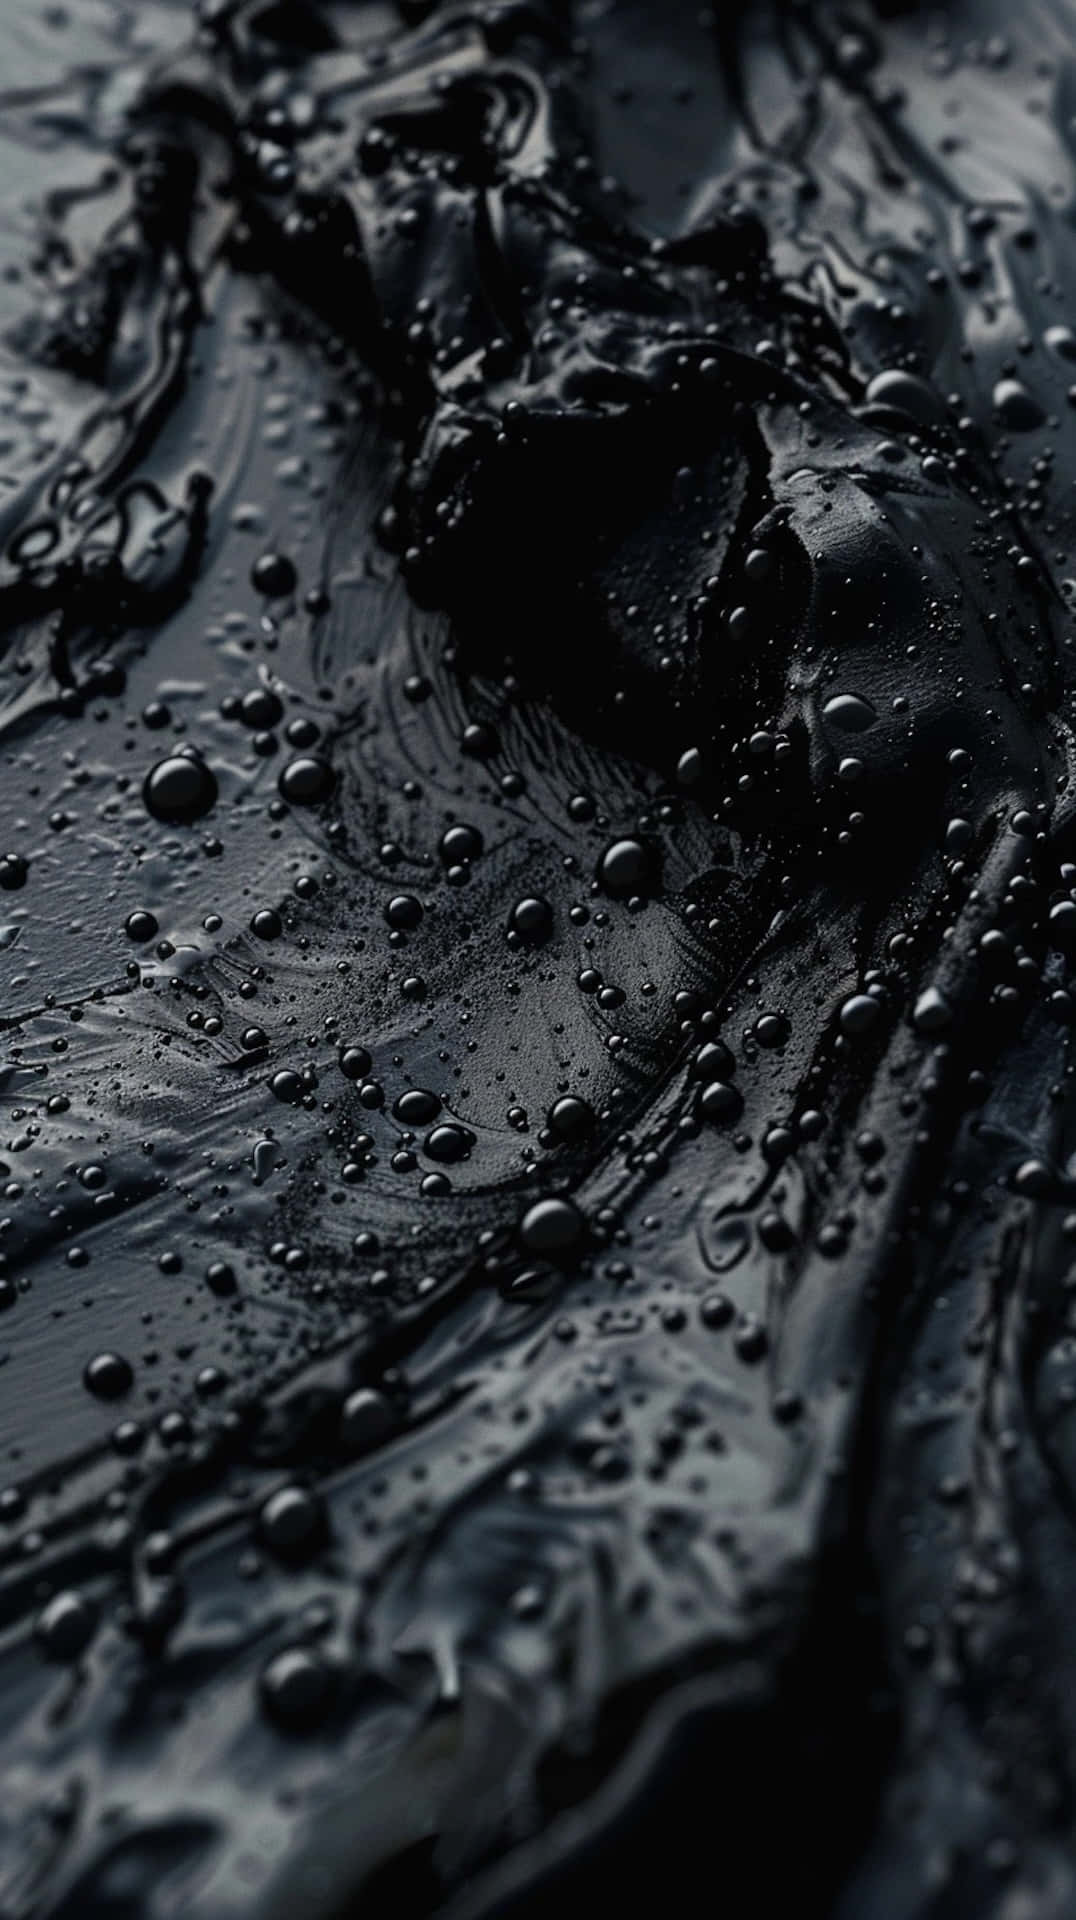 Black Texturewith Water Droplets Wallpaper